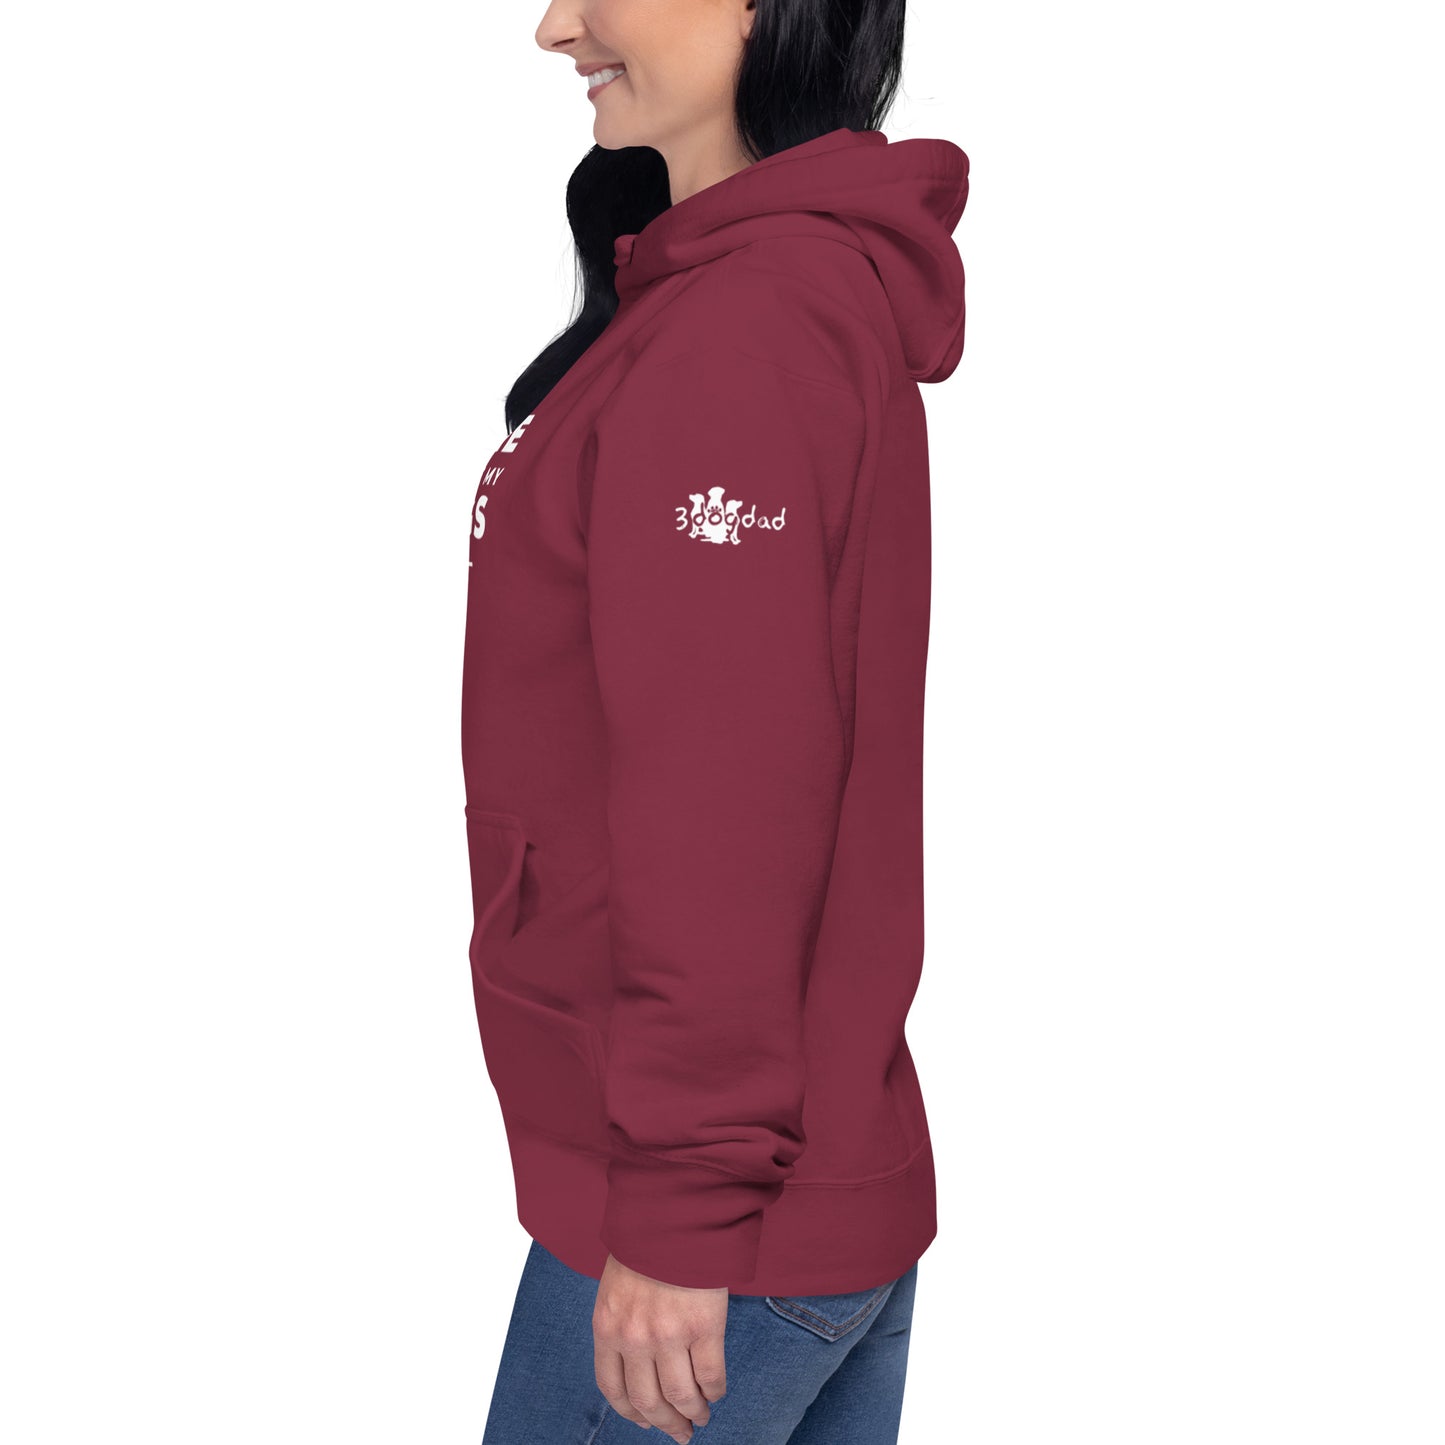 Hoodie with "Home is where my dogs are" Print on front, 3DD logo on left sleeve